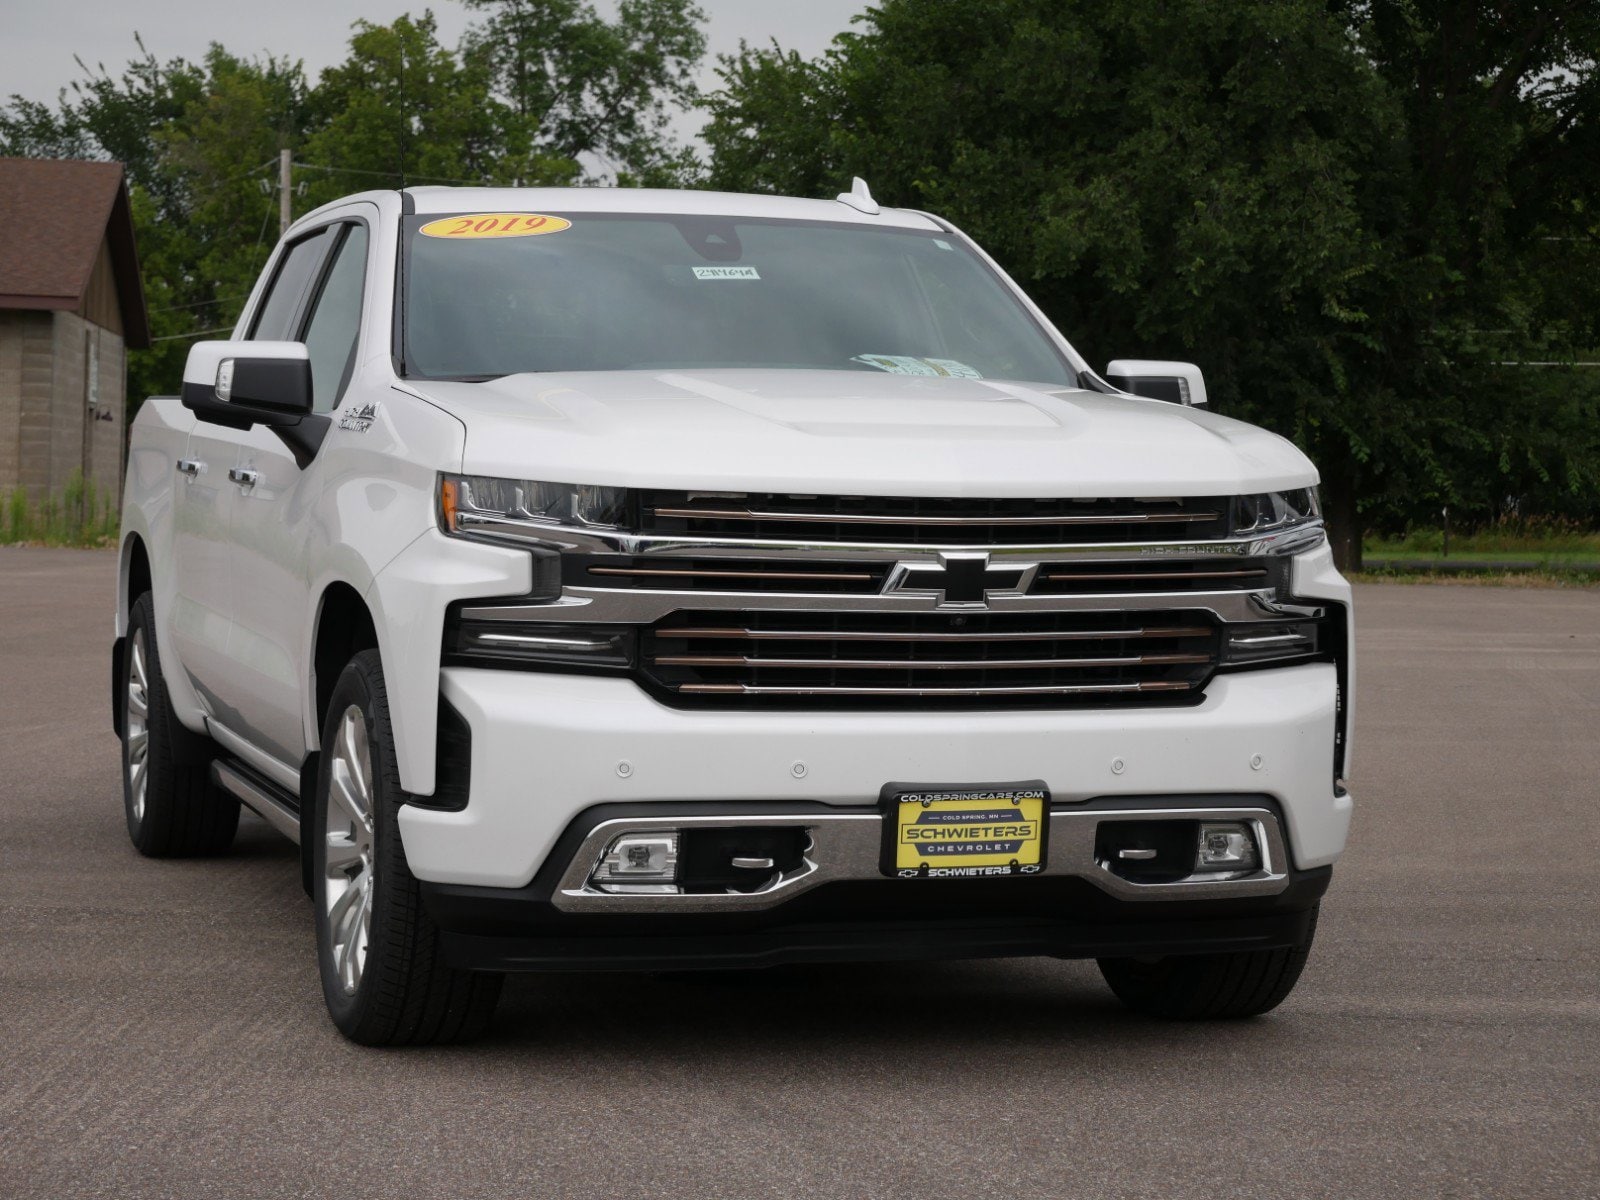 Used 2019 Chevrolet Silverado 1500 High Country with VIN 1GCUYHED0KZ170670 for sale in Cold Spring, Minnesota